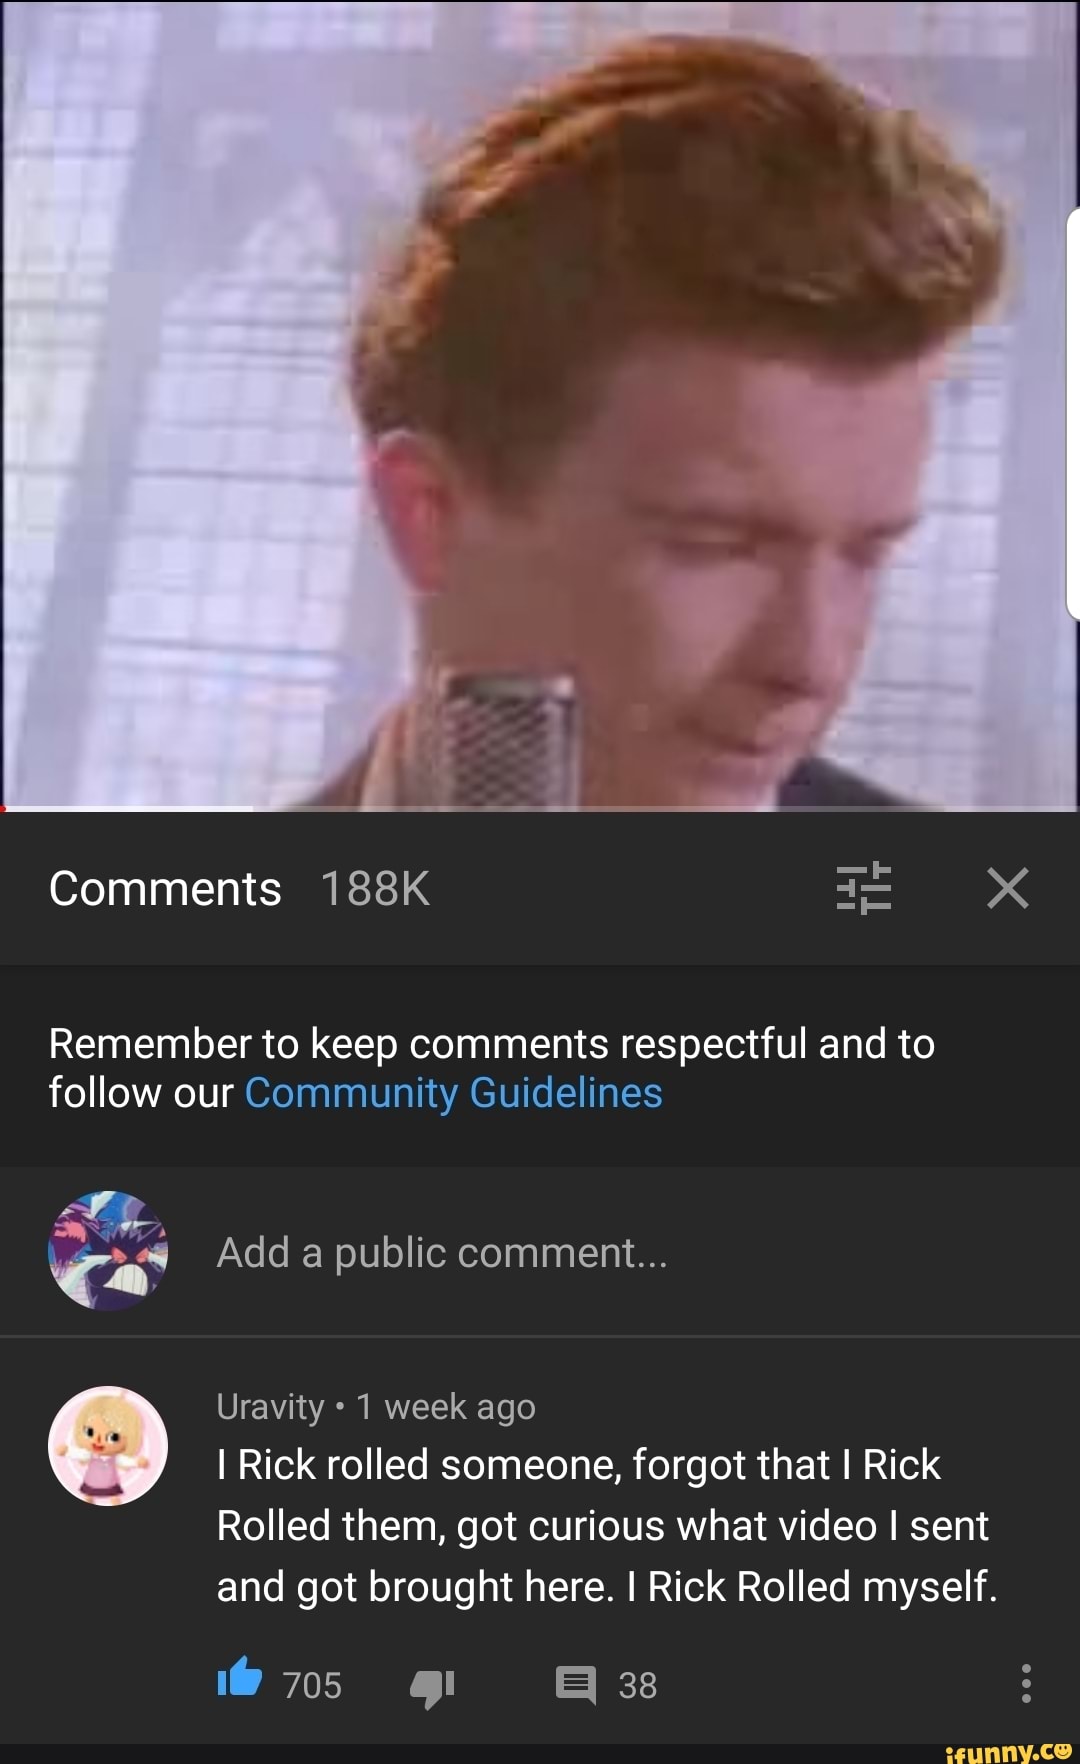 Comments 188k Xx Remember To Keep Comments Respectful And To Follow Our Community Guidelines Add A Public Comment Uravity 1 Week Ago I Rick Rolled Someone Forgot That I Rick Rolled - free robux rickrolled